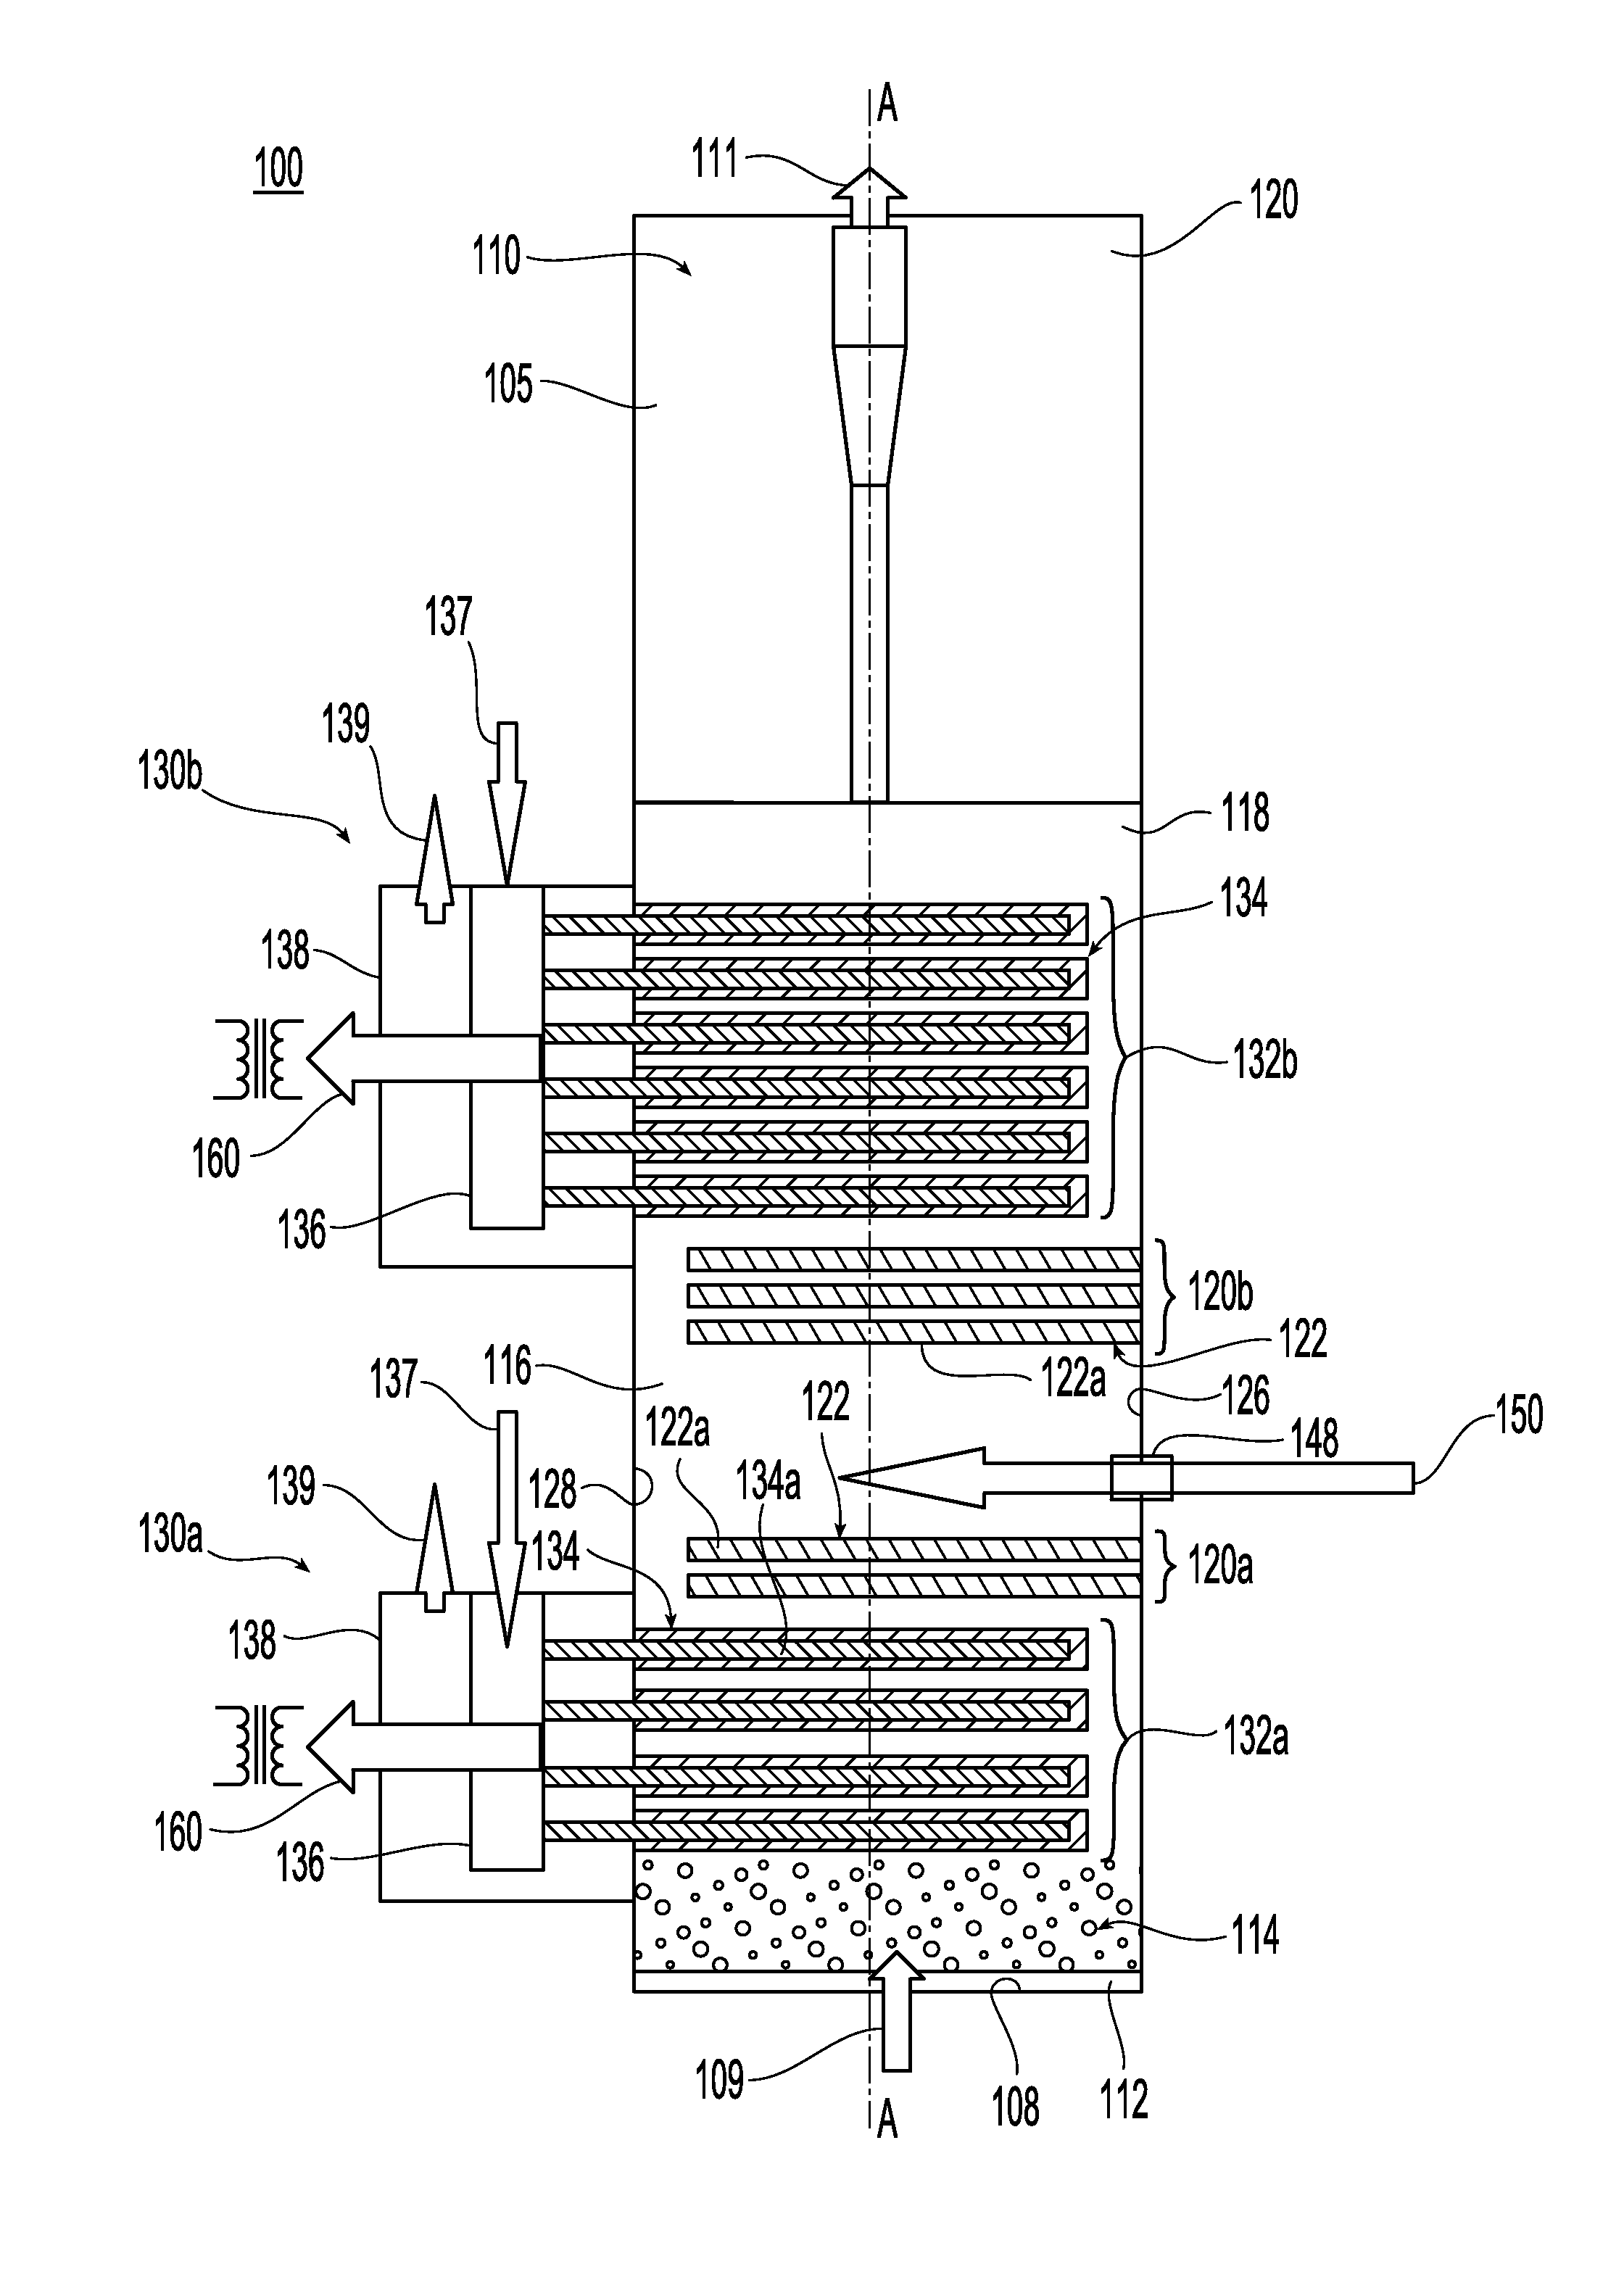 Gasifier having integrated fuel cell power generation system